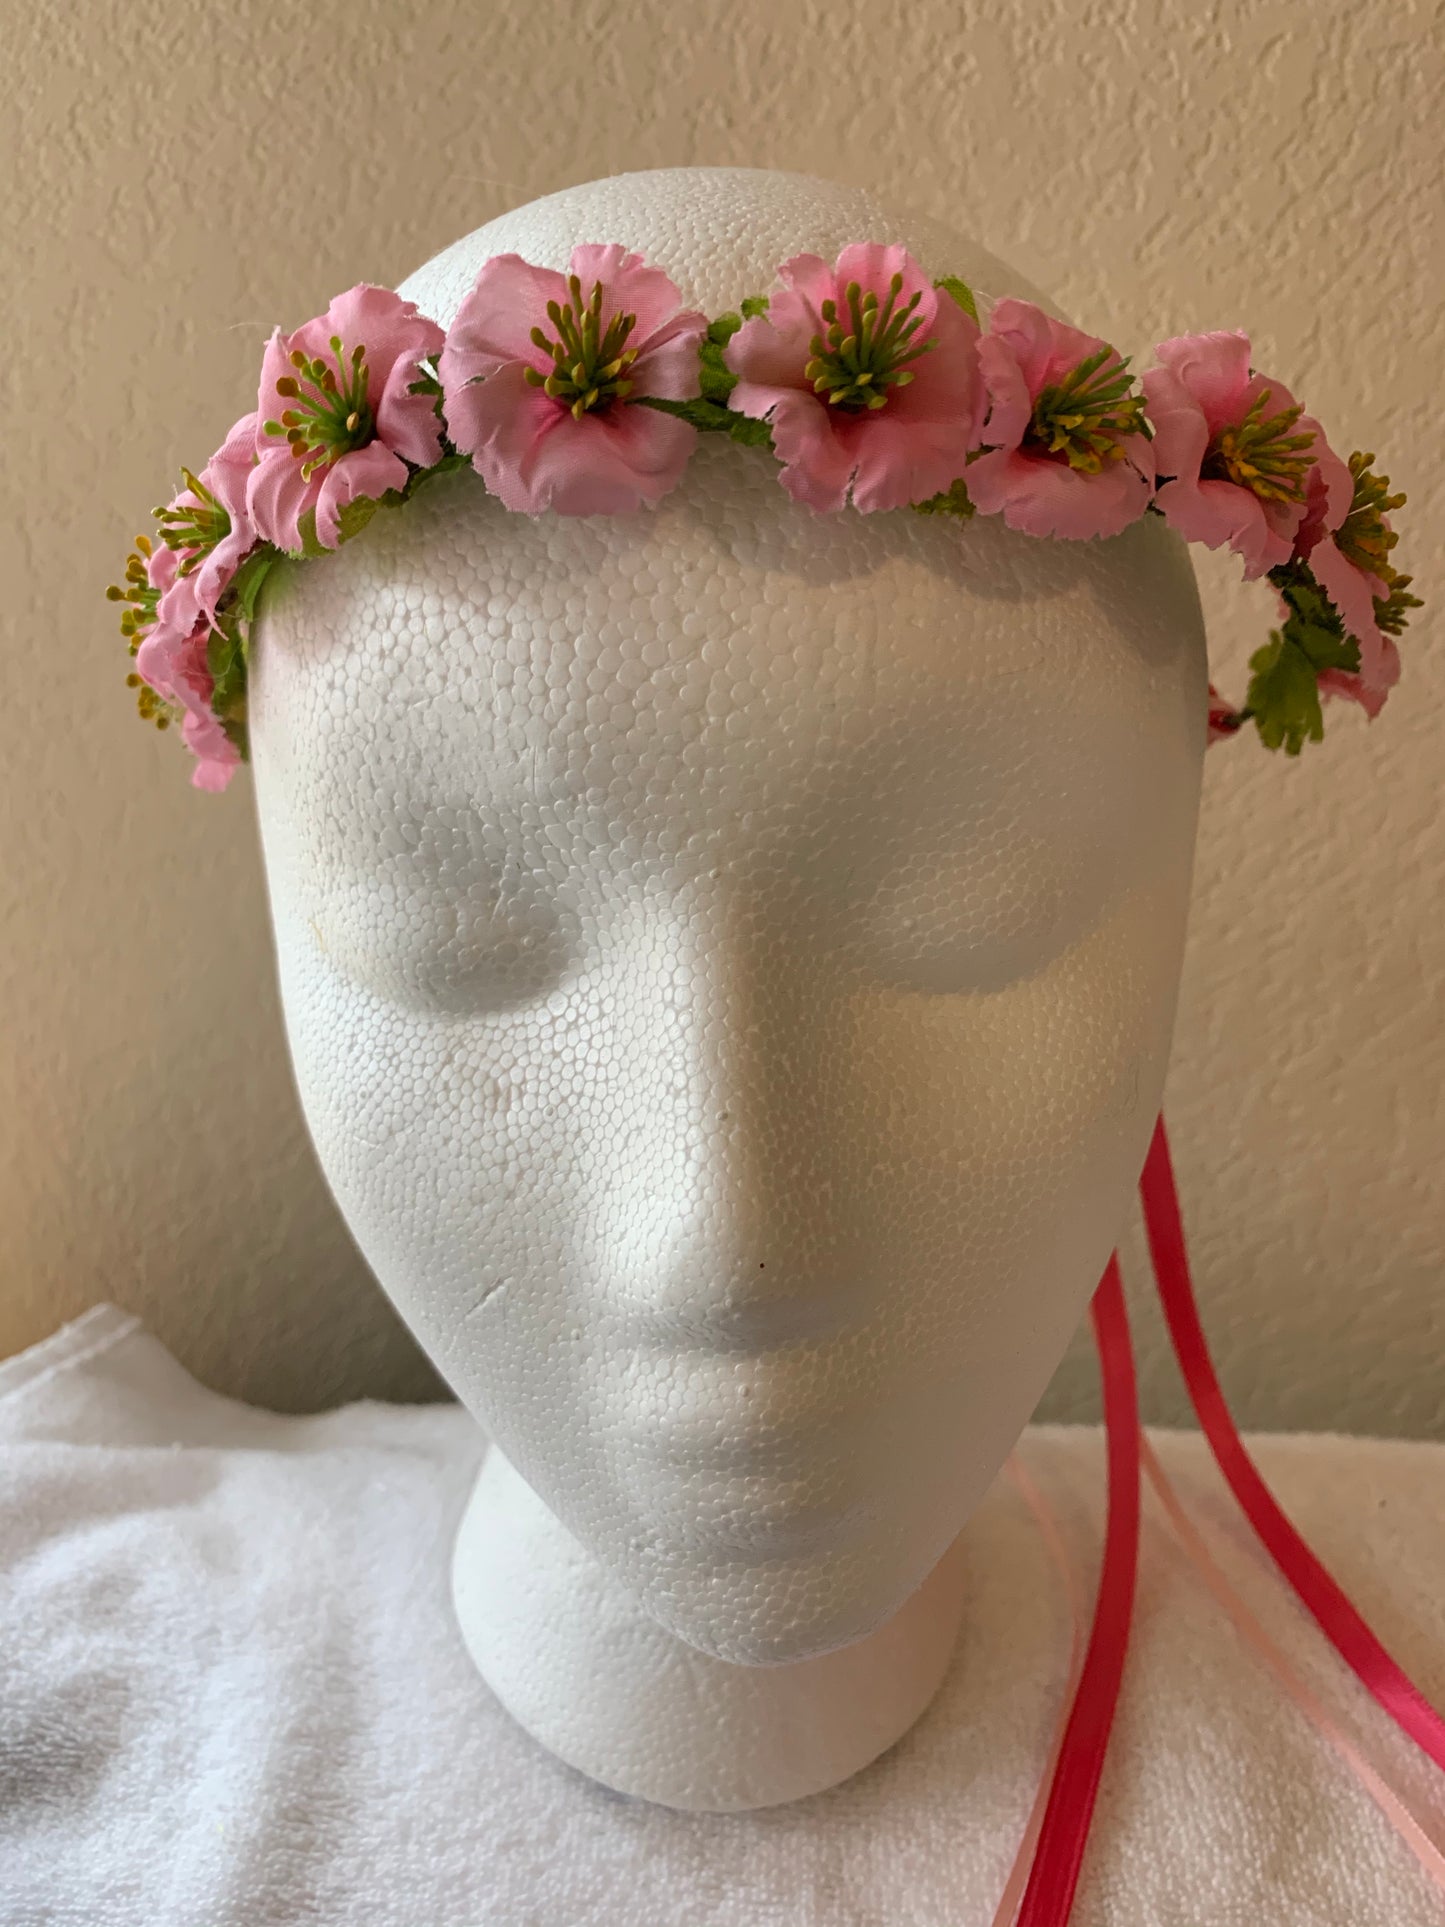 Extra Small Wreath - All Pink Flowers